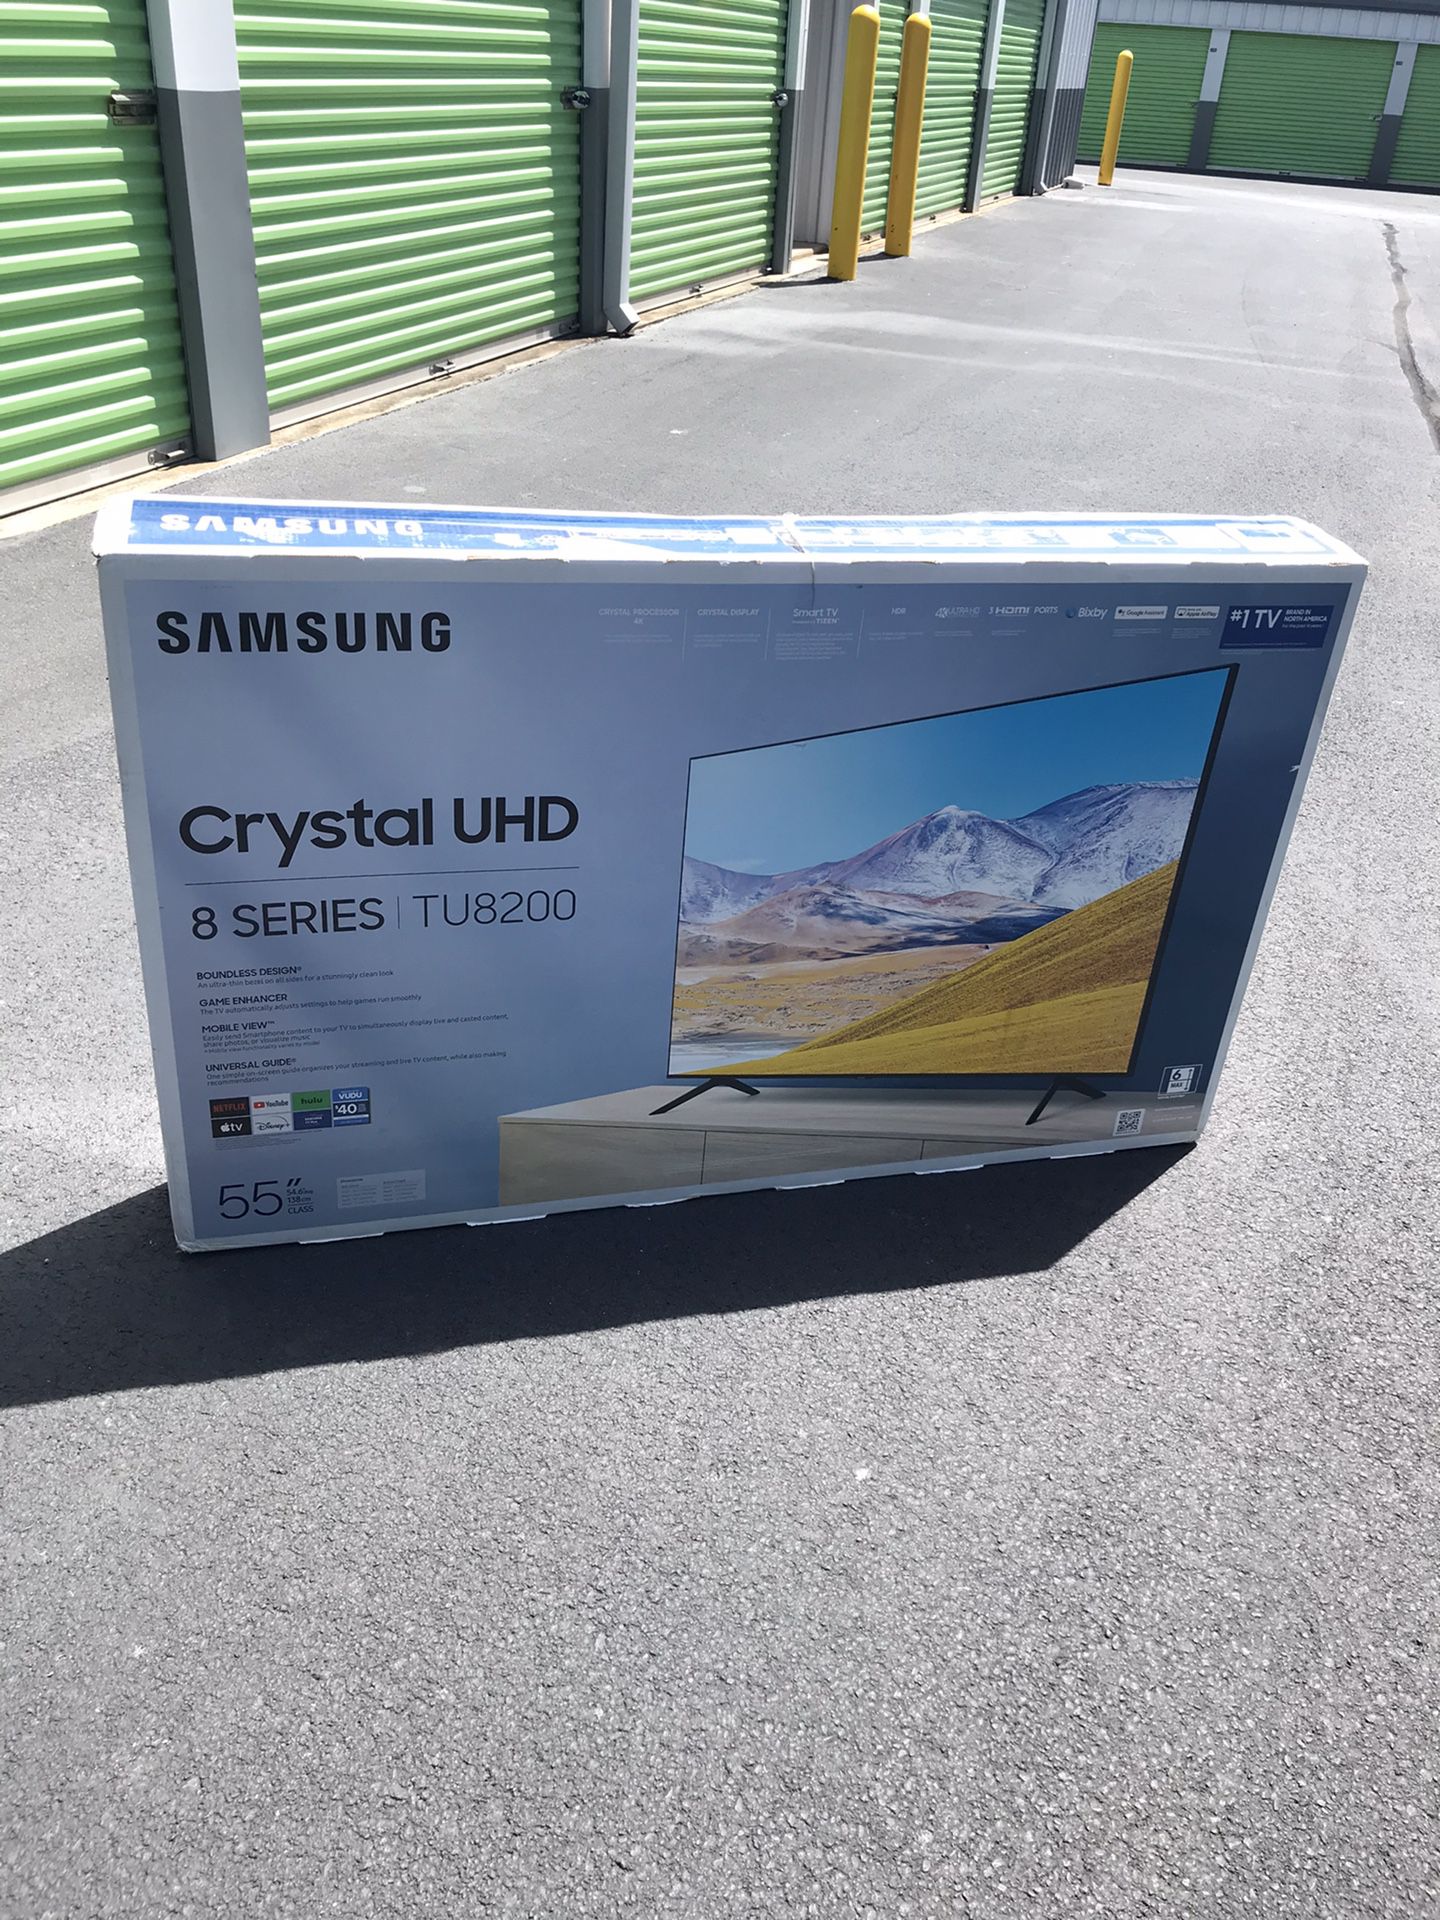 *55” In. 8 Series 2020 Model Samsung 4K Smart TV W/Bluetooth Capability & Wall Mount* -Firm Price, Non-Negotiable*